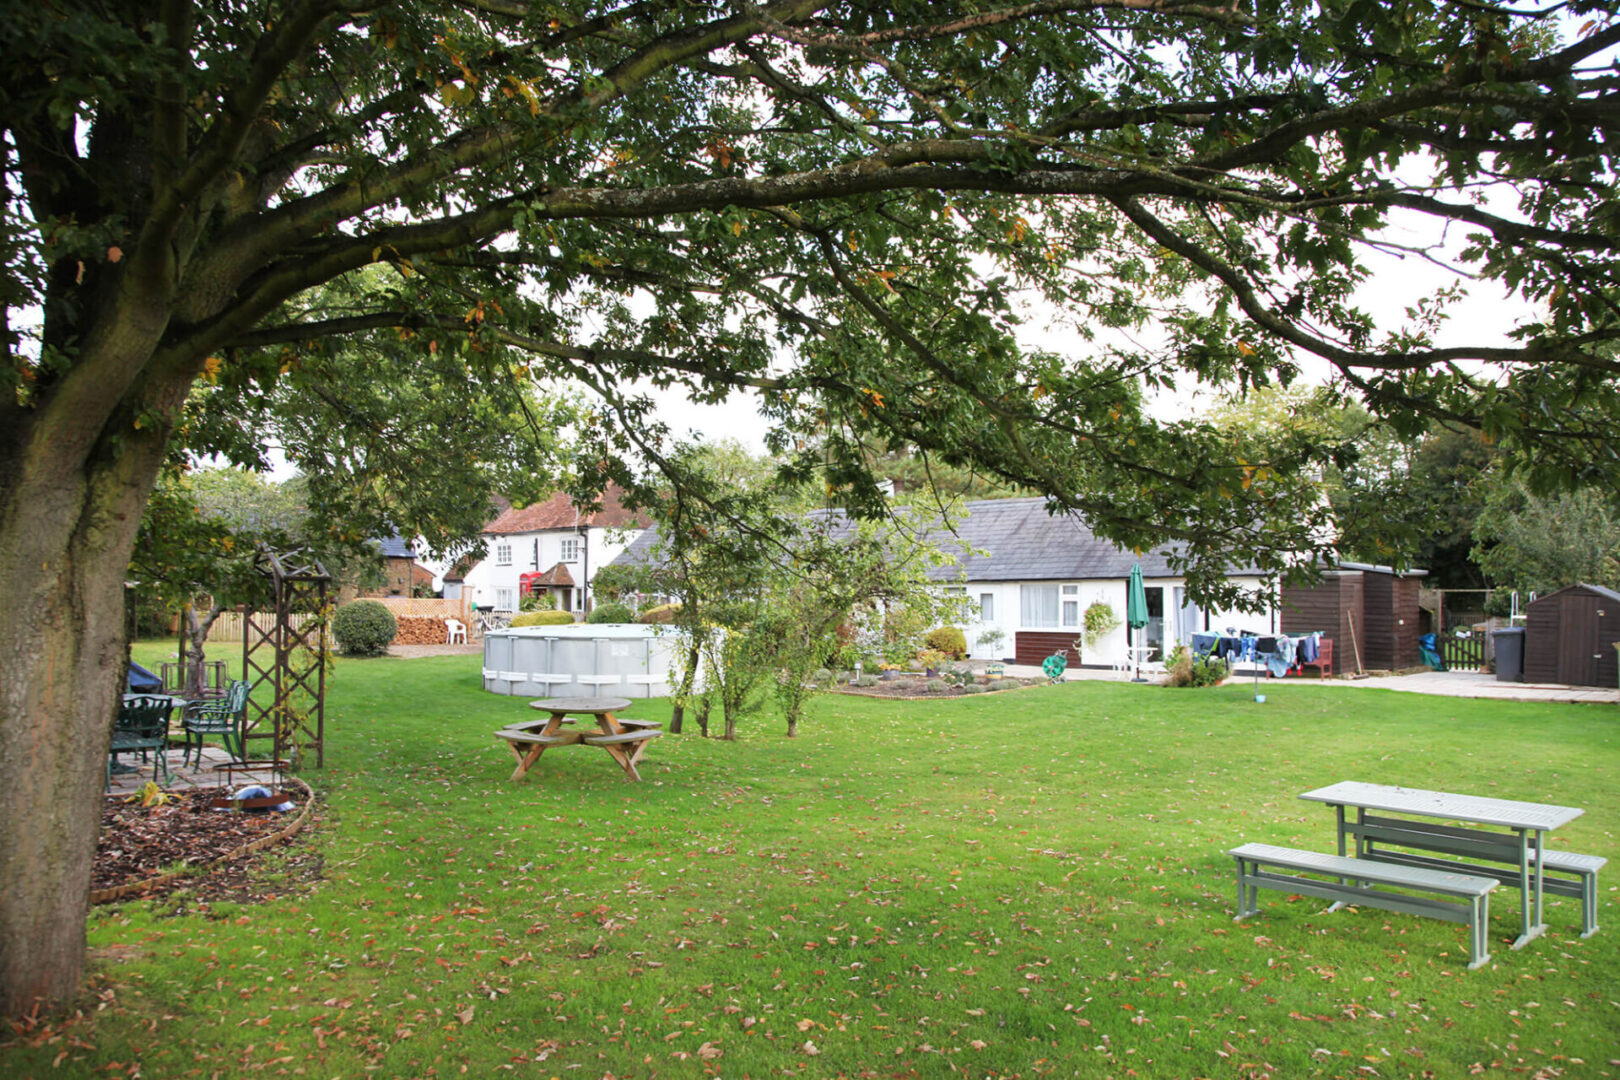 Pet-Friendly Cottages, Maidenhead | Sheephouse Manor Cottages garden view with drier pool benches and tables barbeque area, green grass and old big tree. autumn view